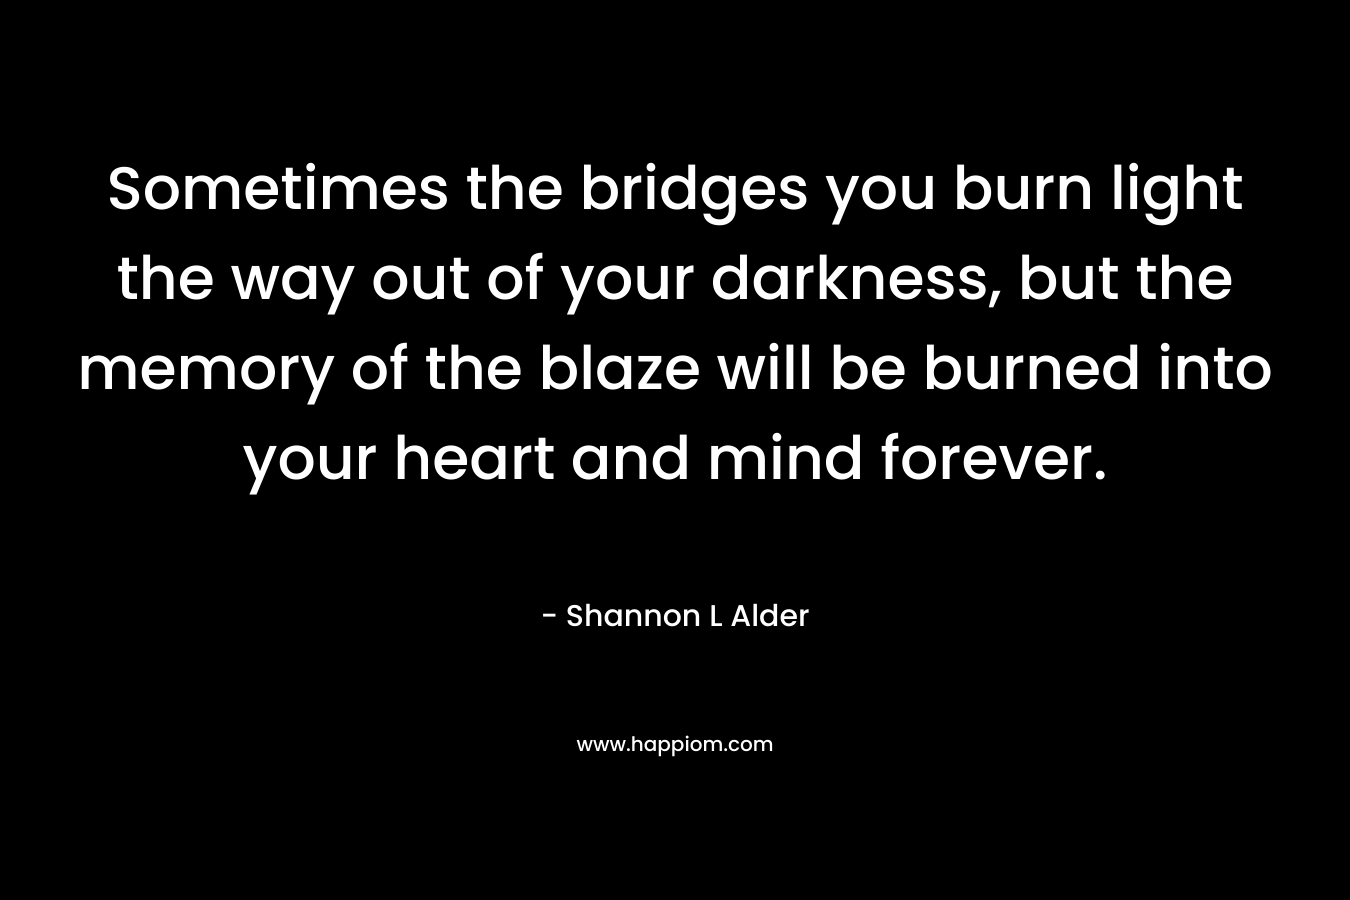 Sometimes the bridges you burn light the way out of your darkness, but the memory of the blaze will be burned into your heart and mind forever.